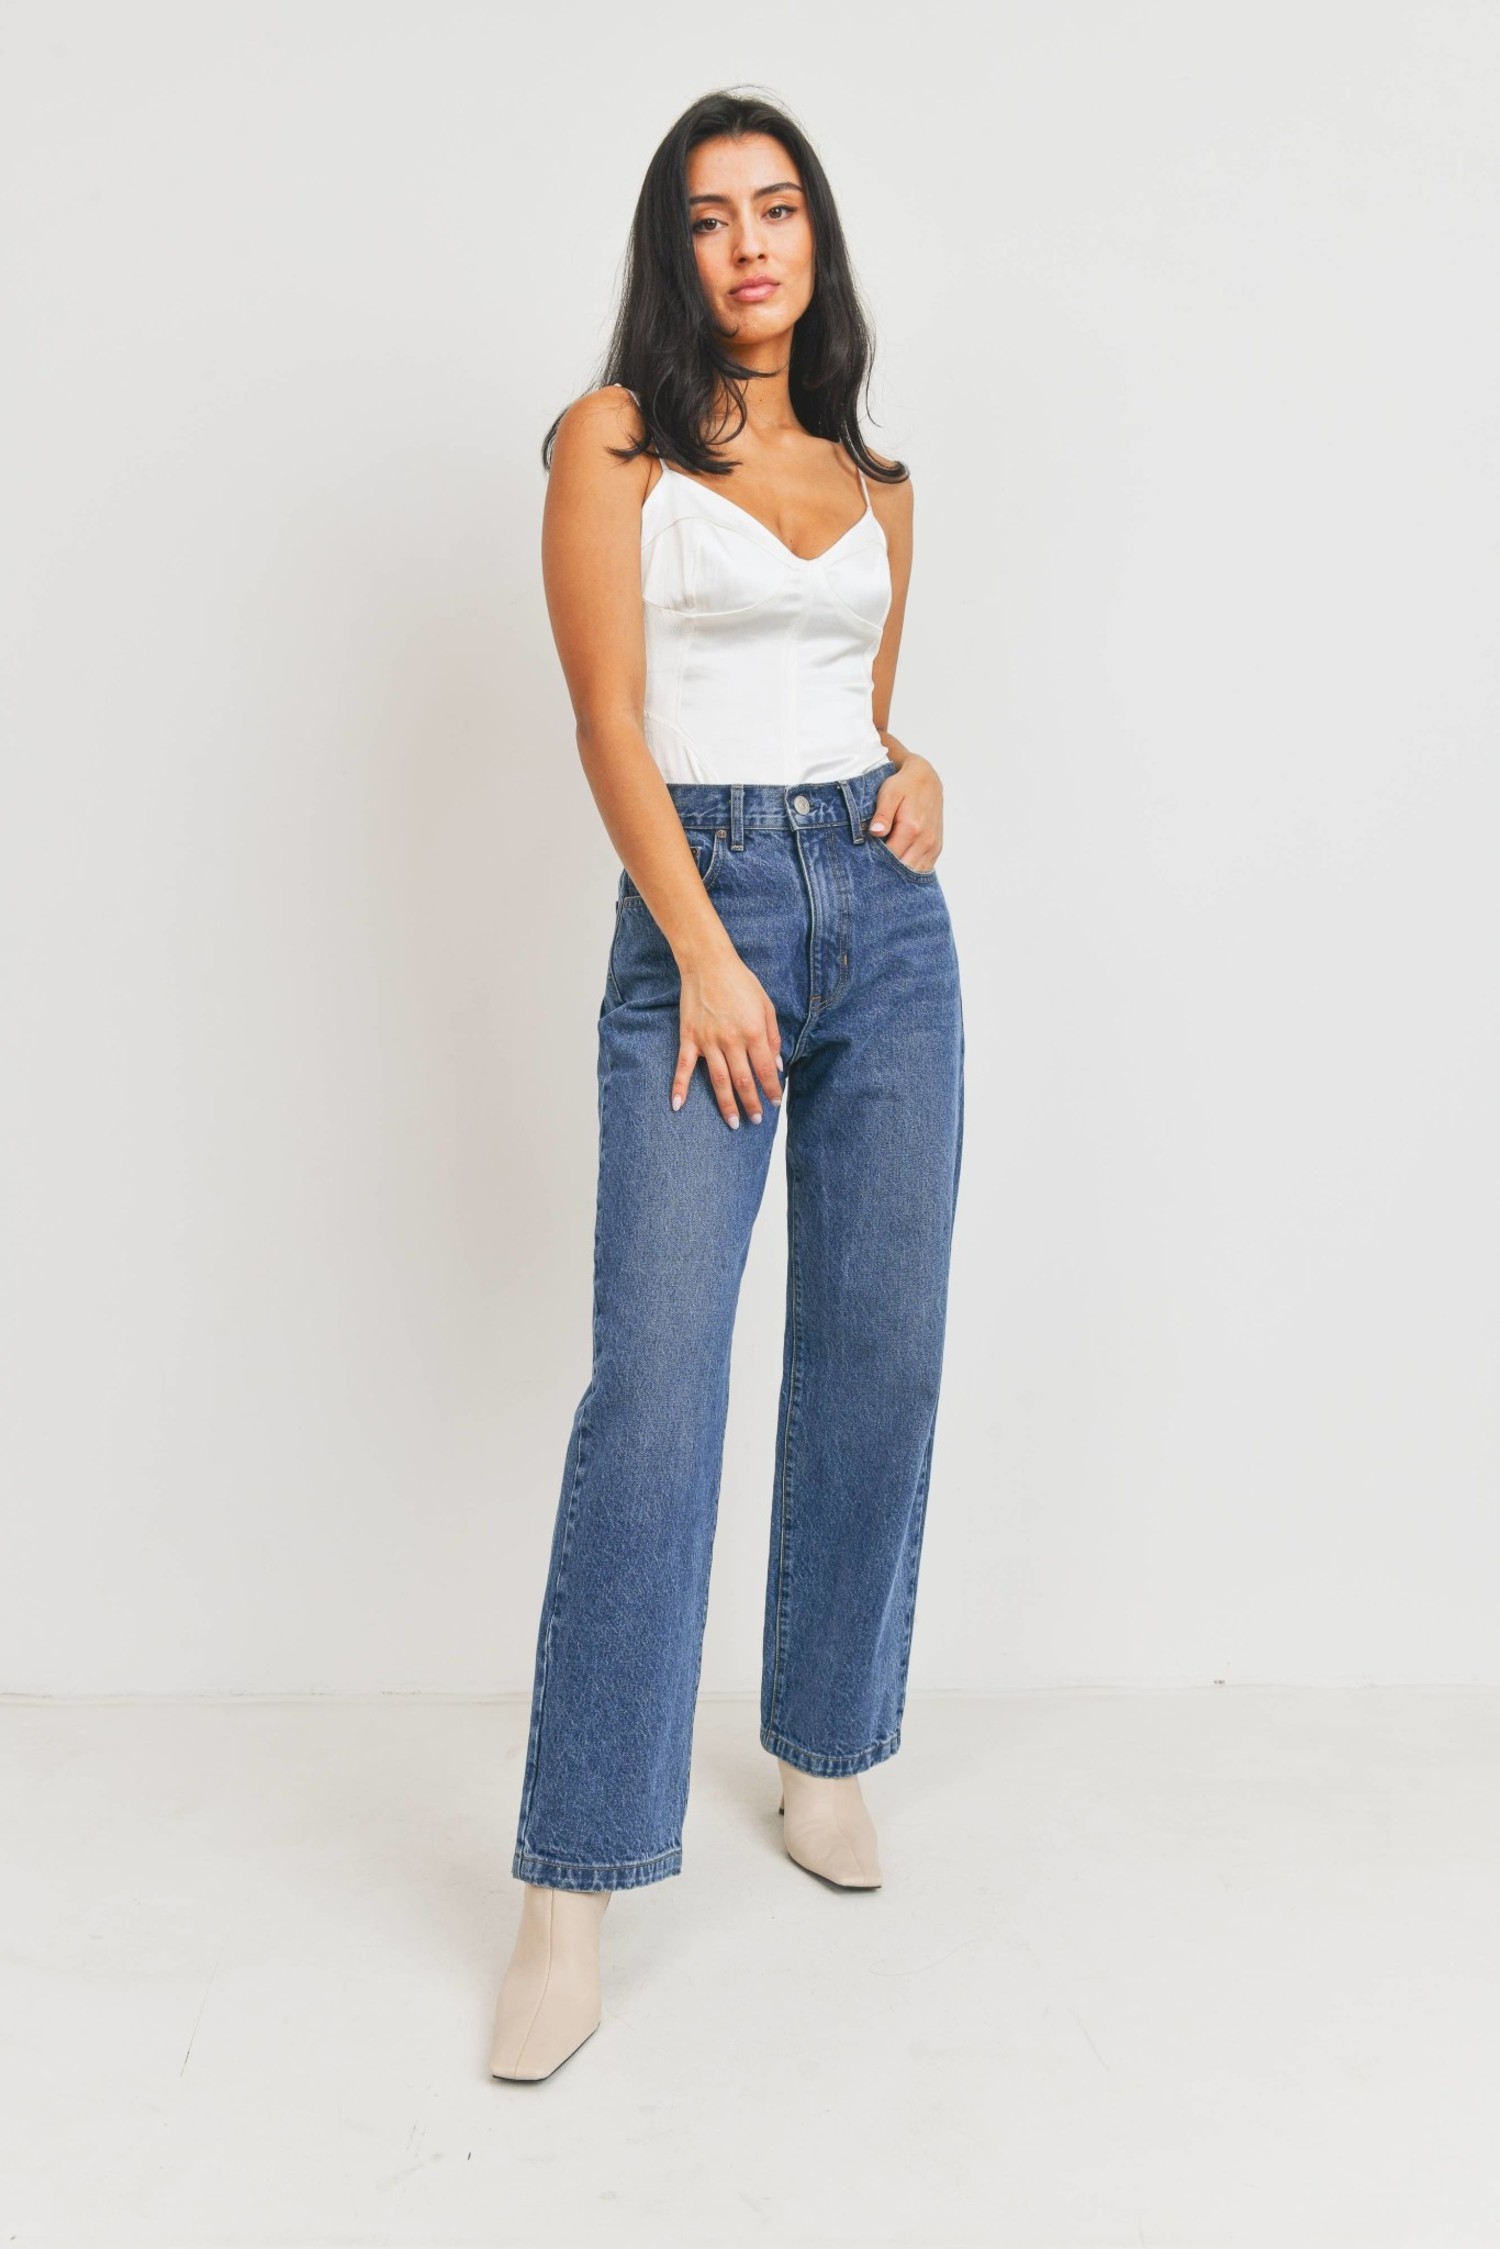 Hudson Jeans Women's Clothing On Sale Up To 90% Off Retail